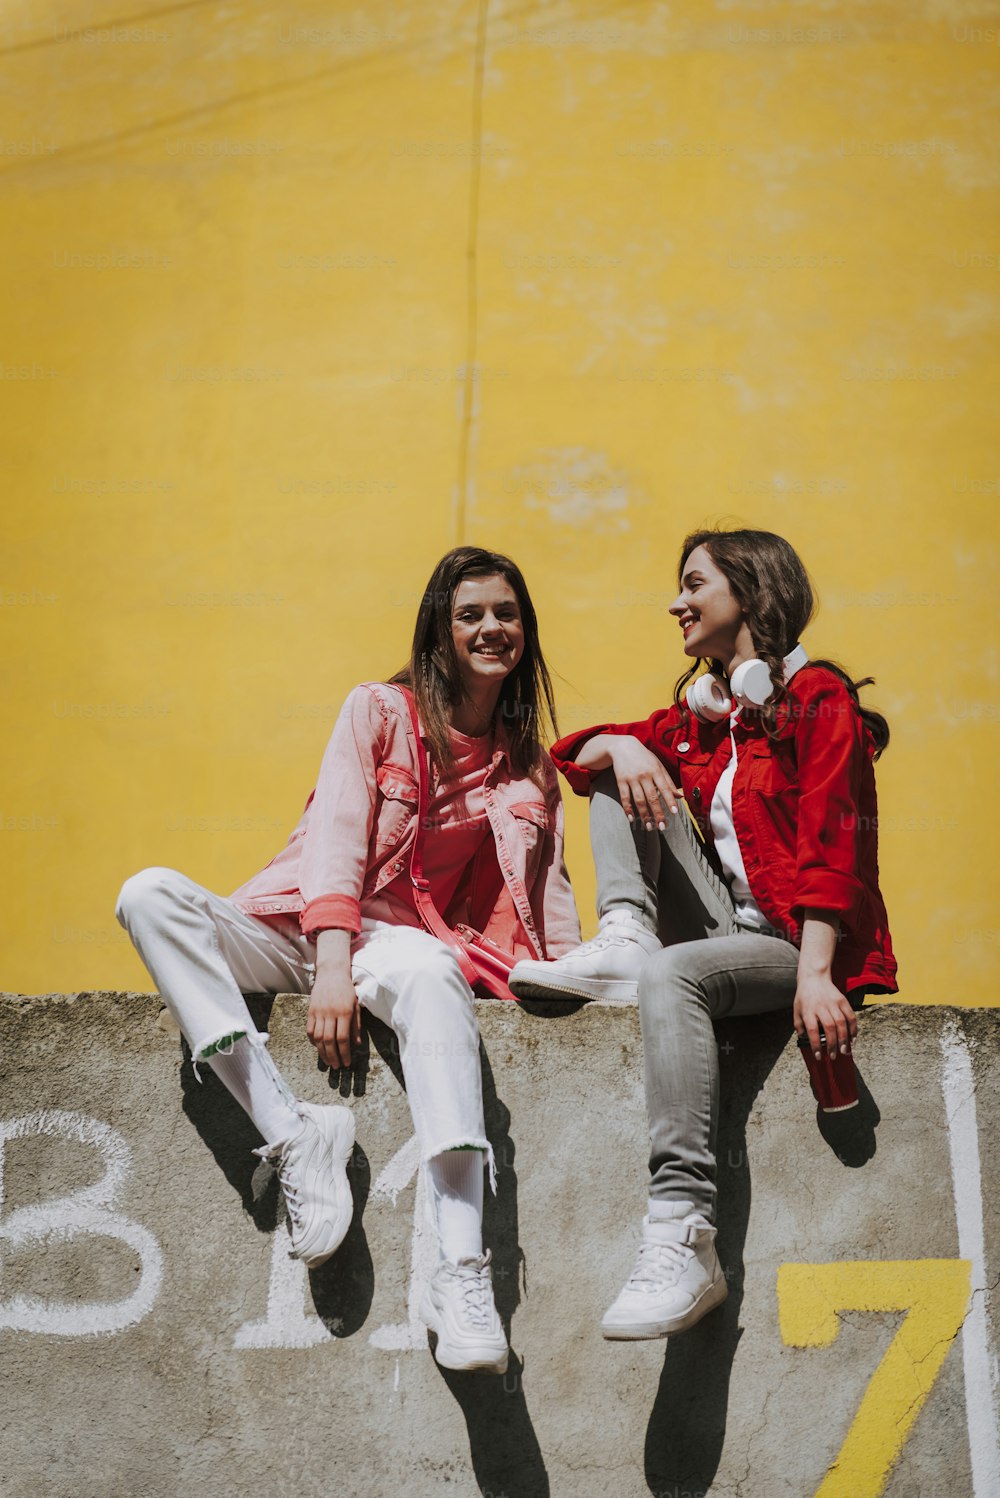 Urban lifestyle concept. Full length portrait of two young happy smiling hipster ladies resting together on parapet wall